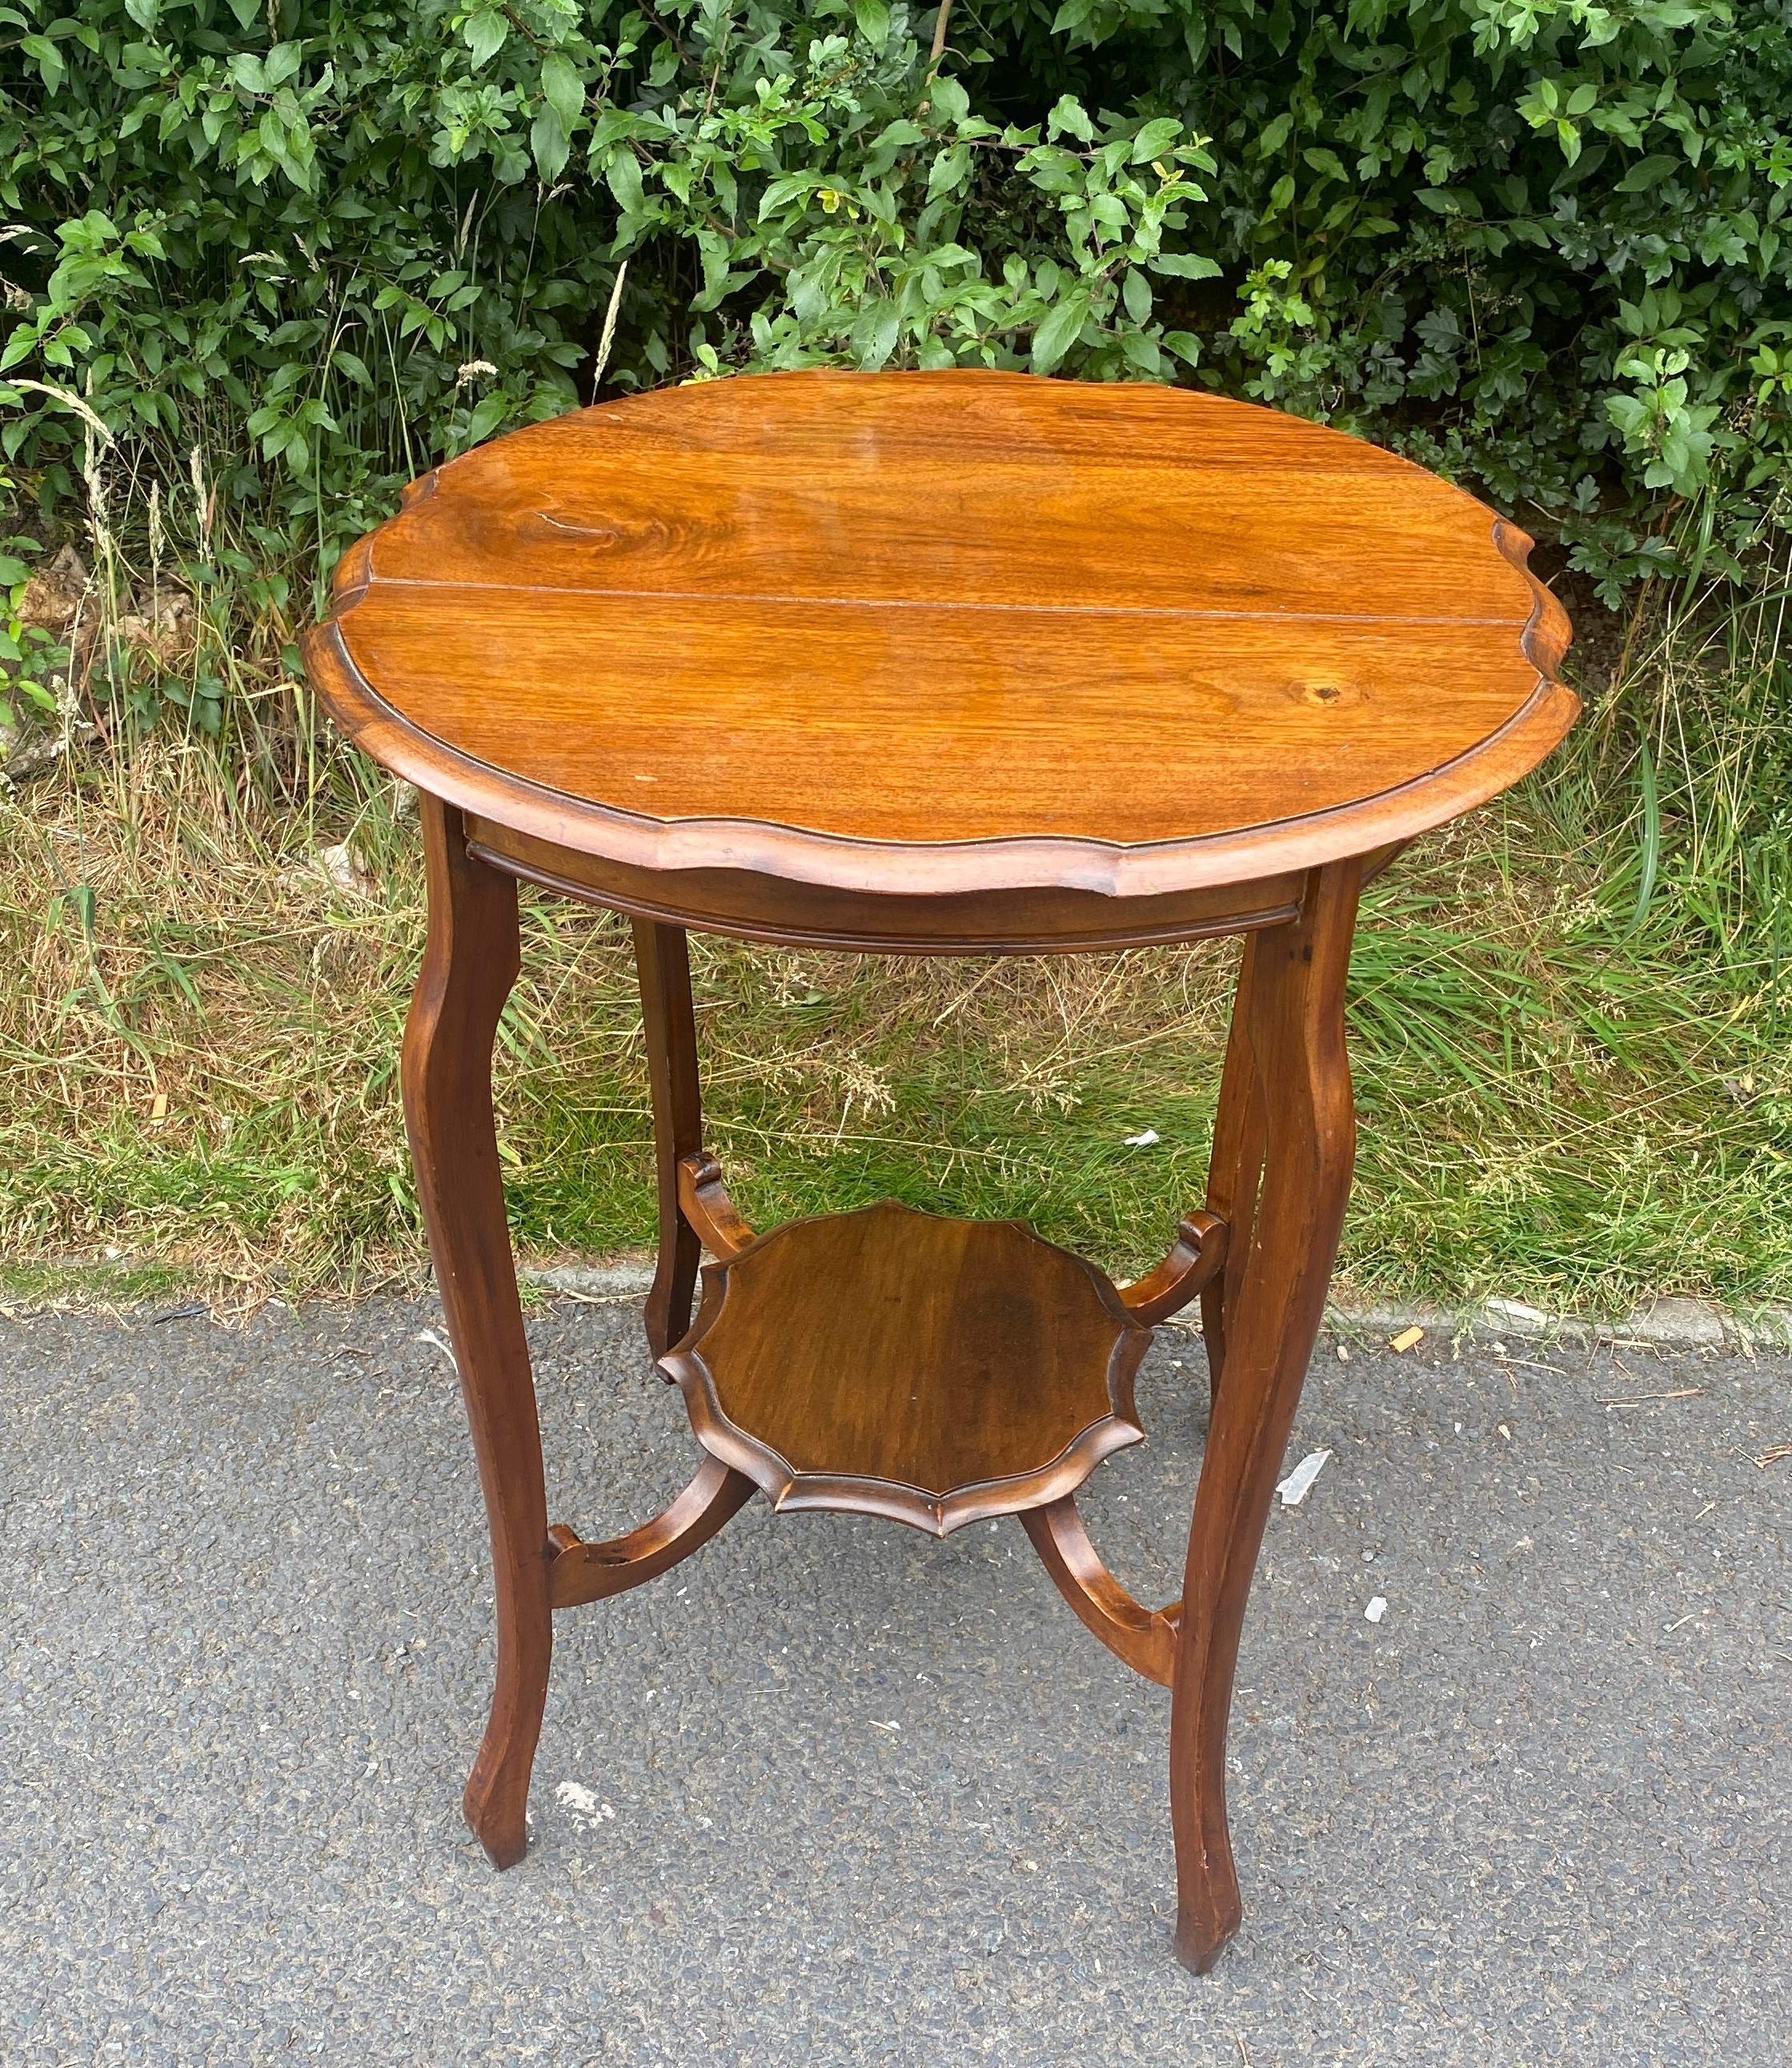 Oak occasional table measures approx 27 inches 23 inches diameter - Image 4 of 4